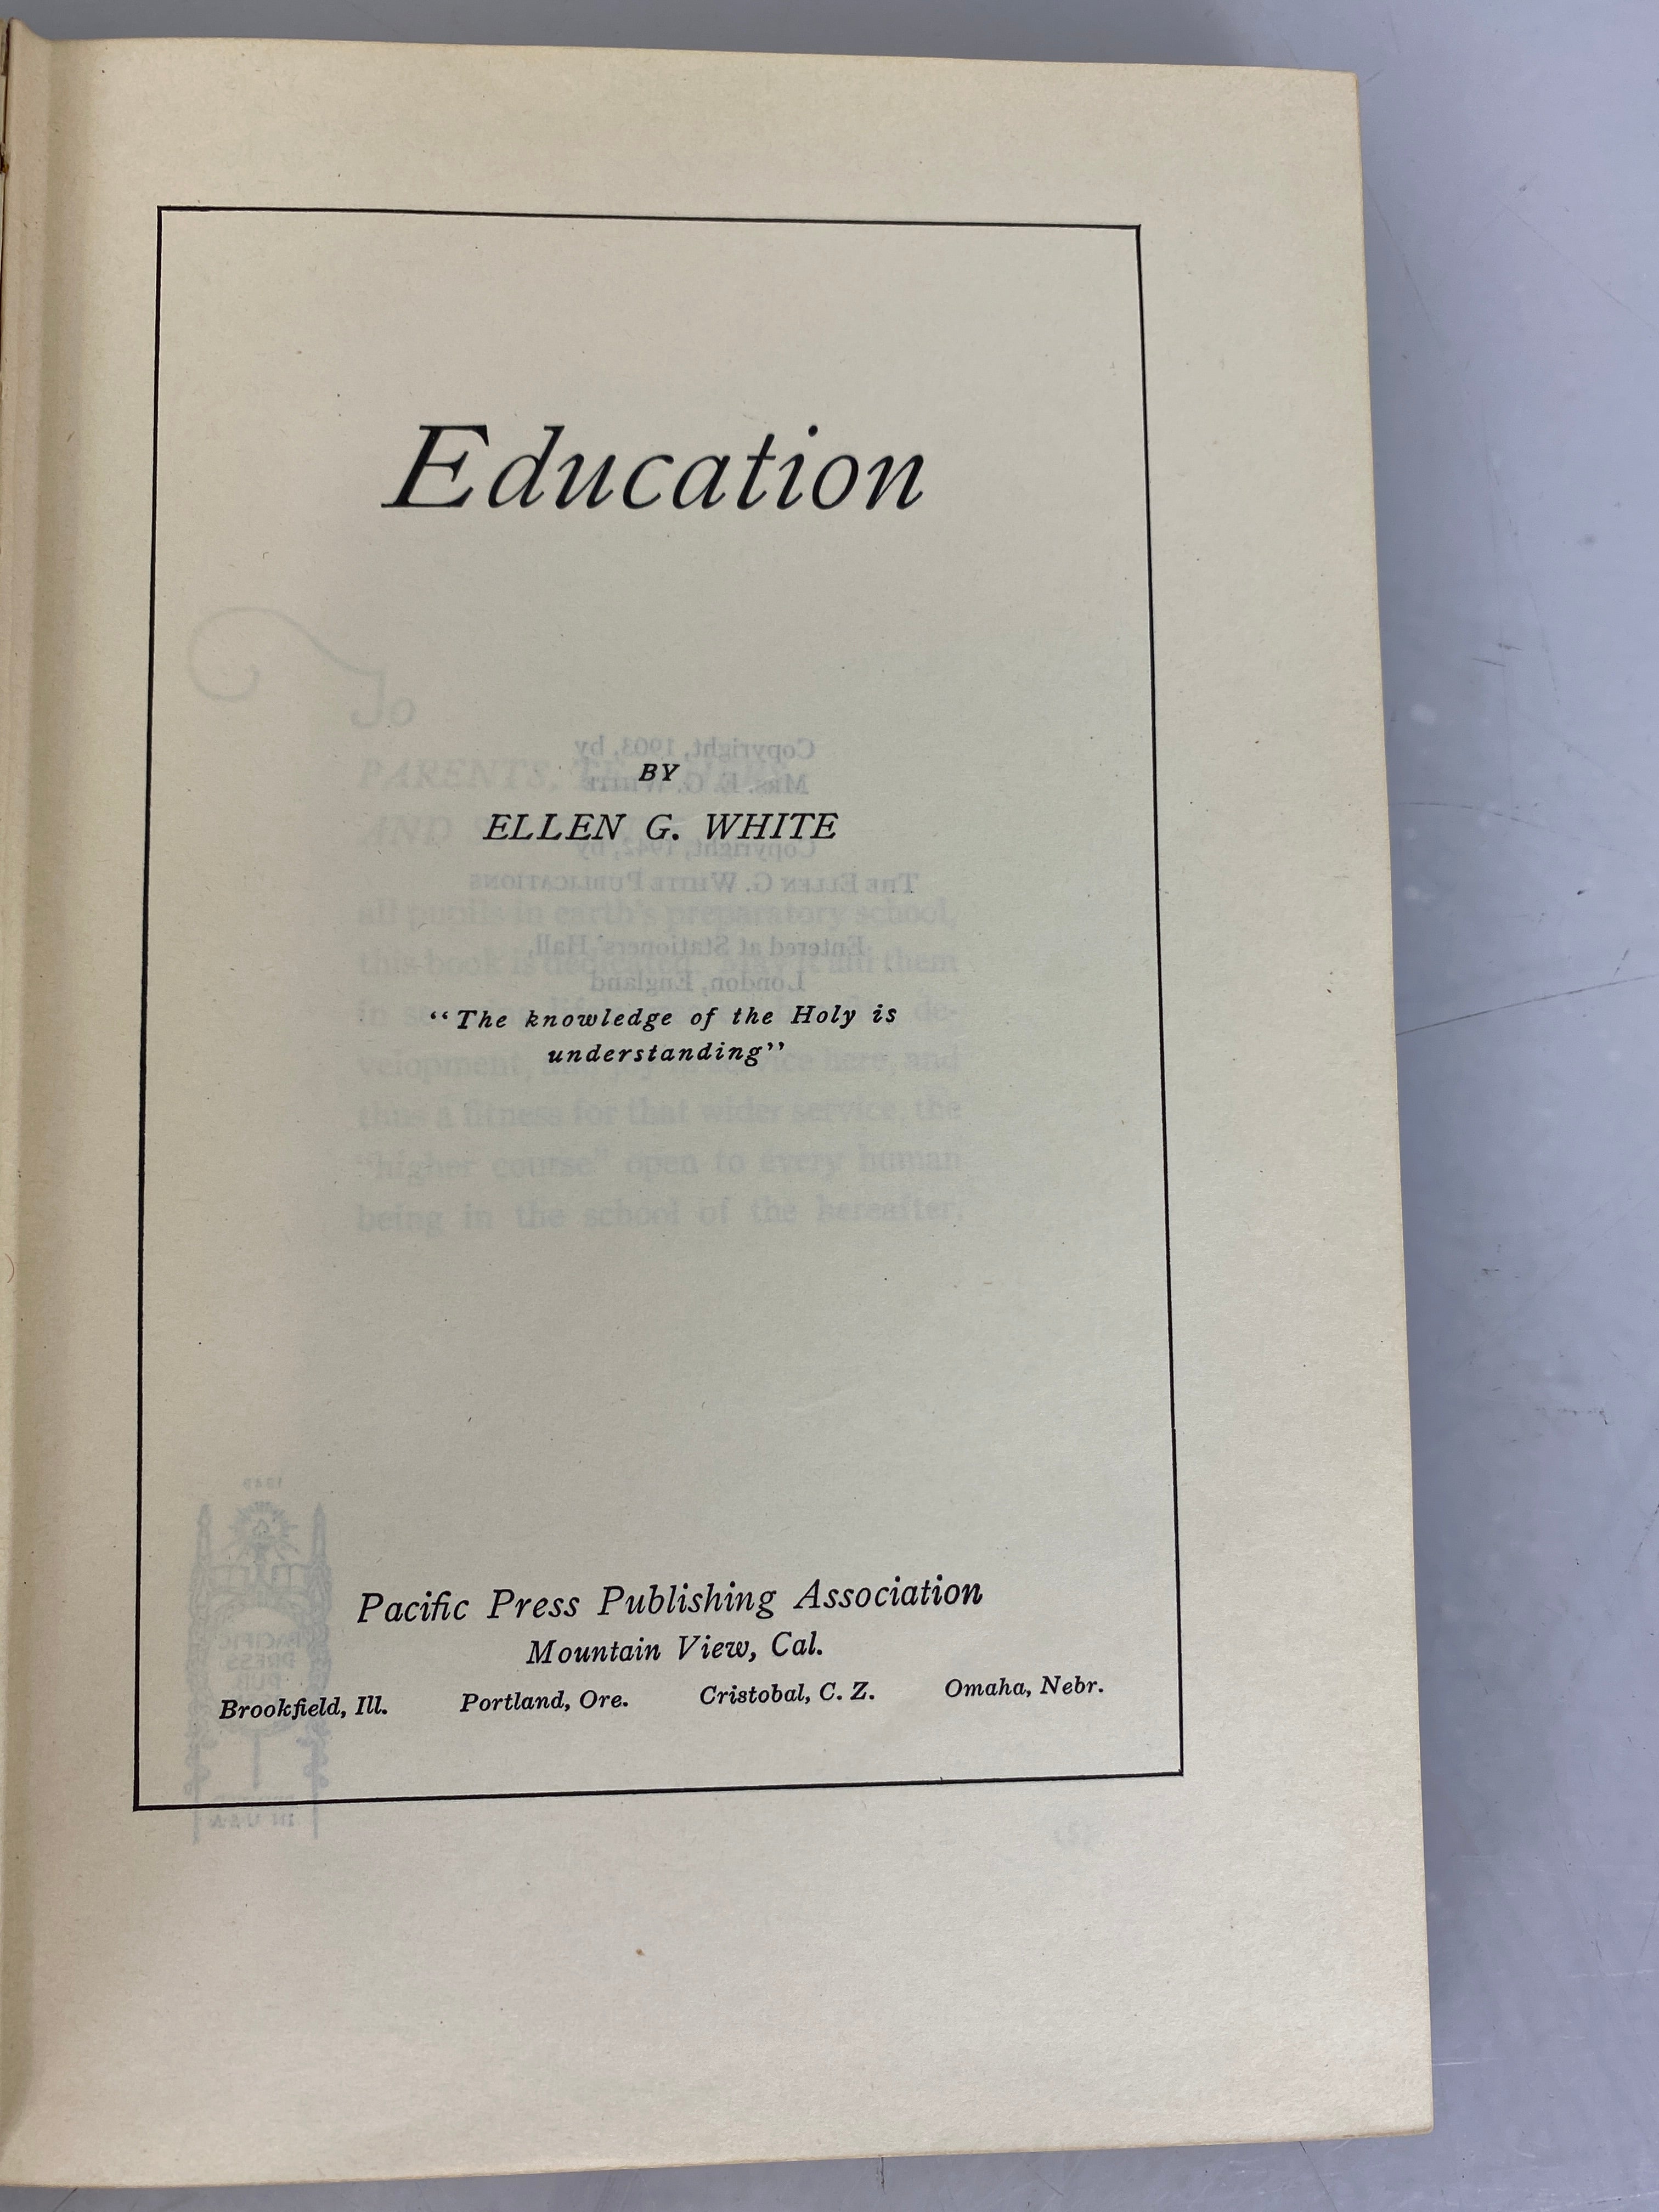 Lot of 3 Ellen G. White Books: Early Writings 1942, The Acts of the Apostles 1954, and Education 1942 HC SC